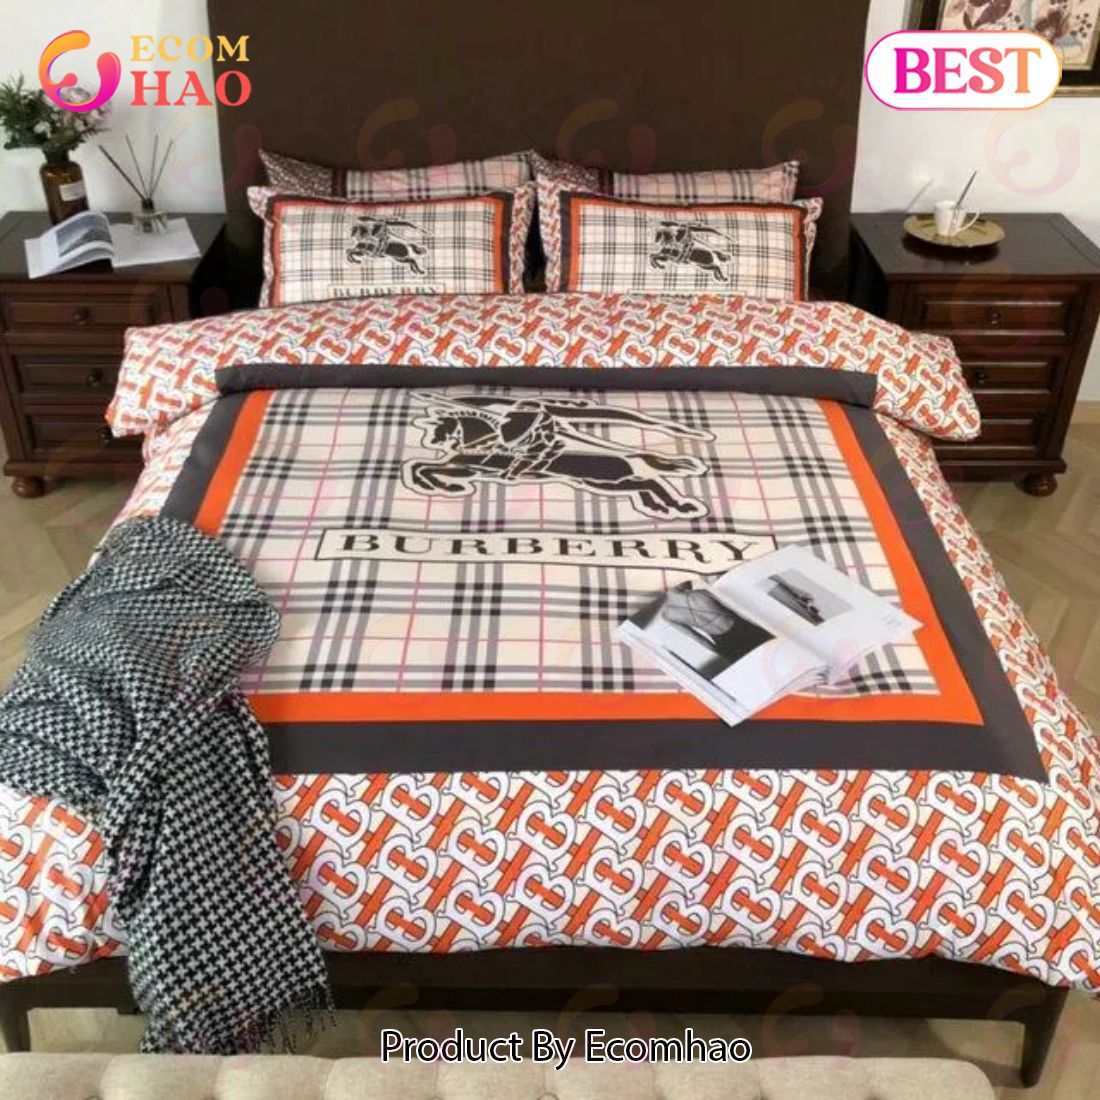 Burberry Fashion New Bedding Sets Quilt Sets Duvet Cover Luxury Brand Bedding Decor Bedroom Sets Best Luxury Bed Sets Gift Thankgivings And Christmas